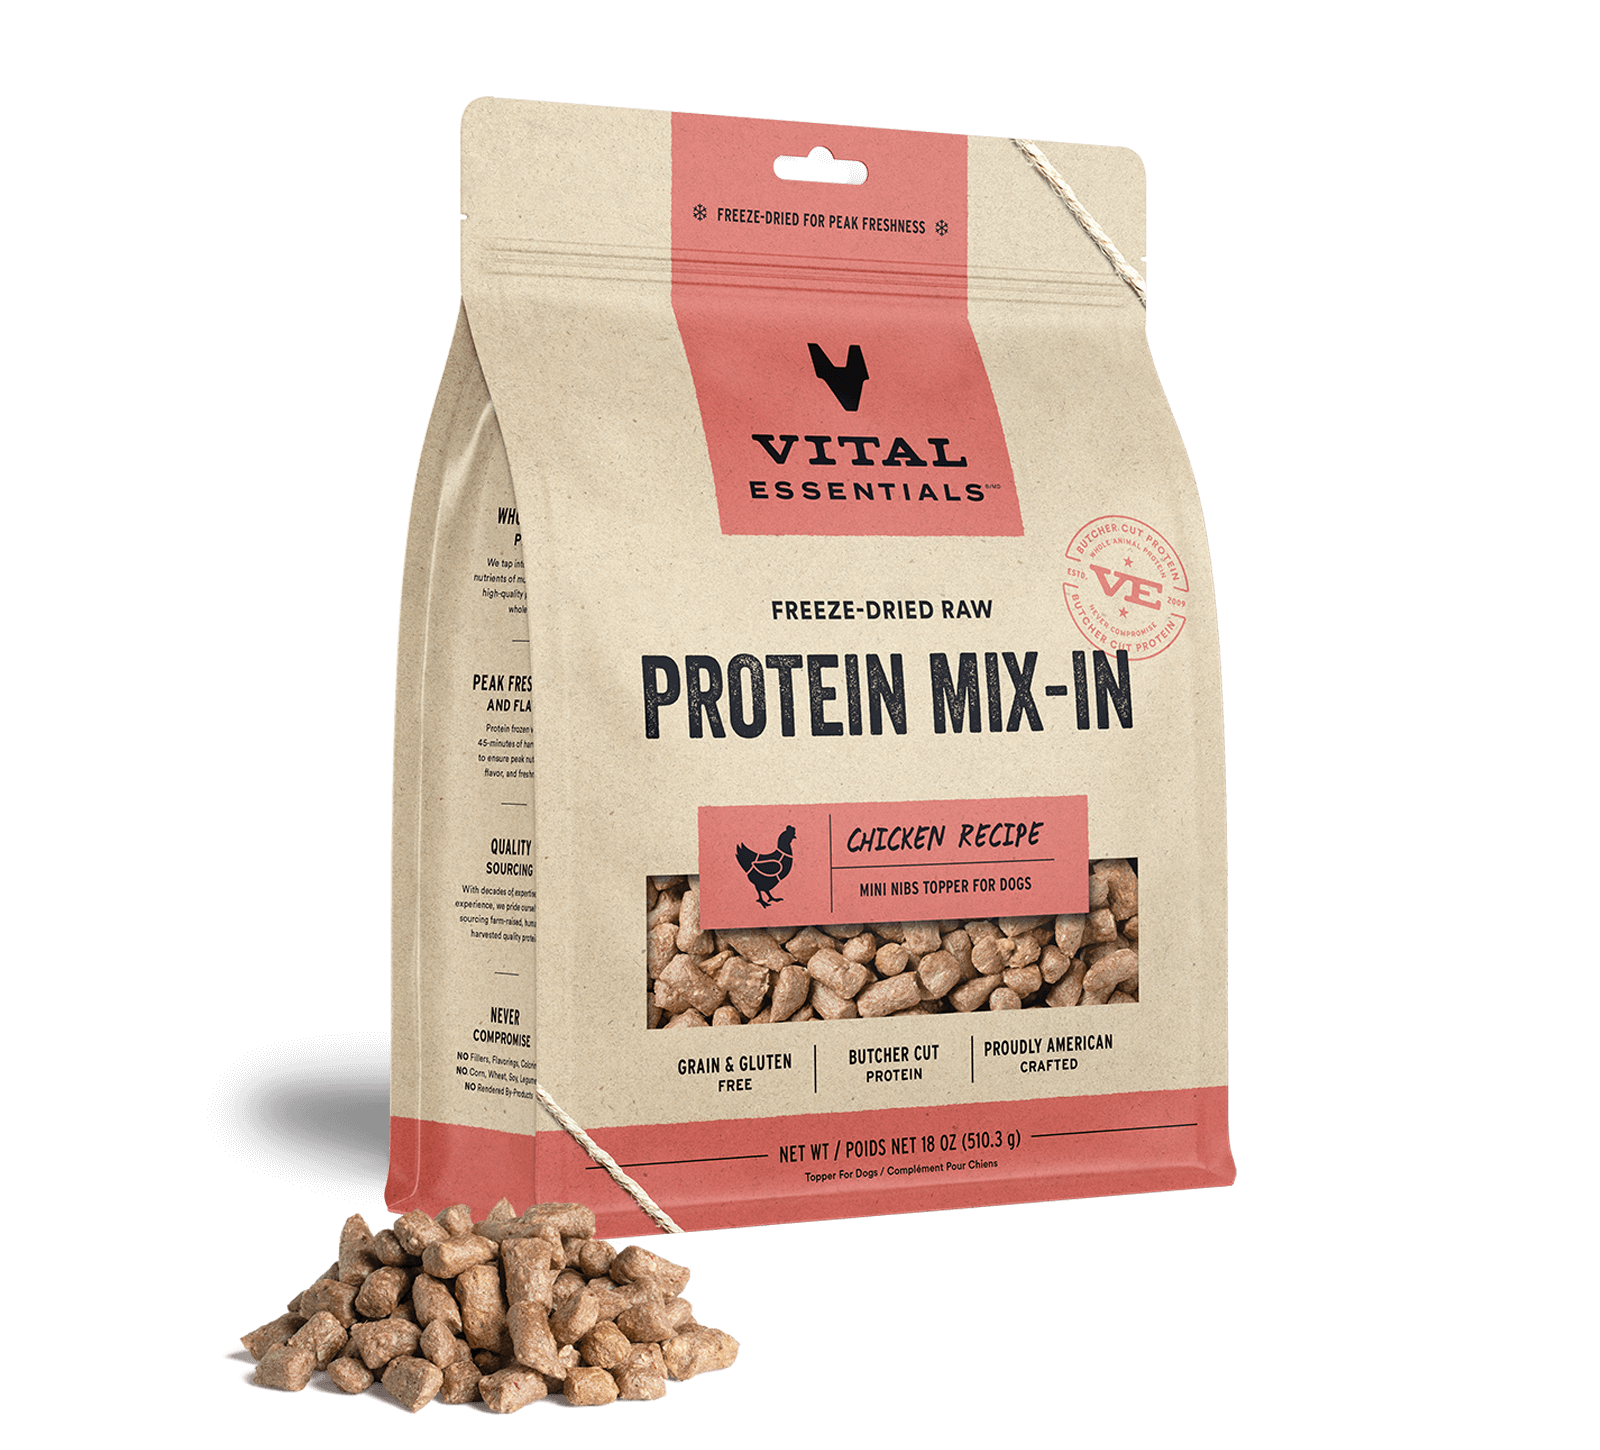 Vital Essentials Freeze-Dried Raw Protein Mix-In Chicken Recipe Mini Nibs Topper for Dogs, 18 oz - Treats